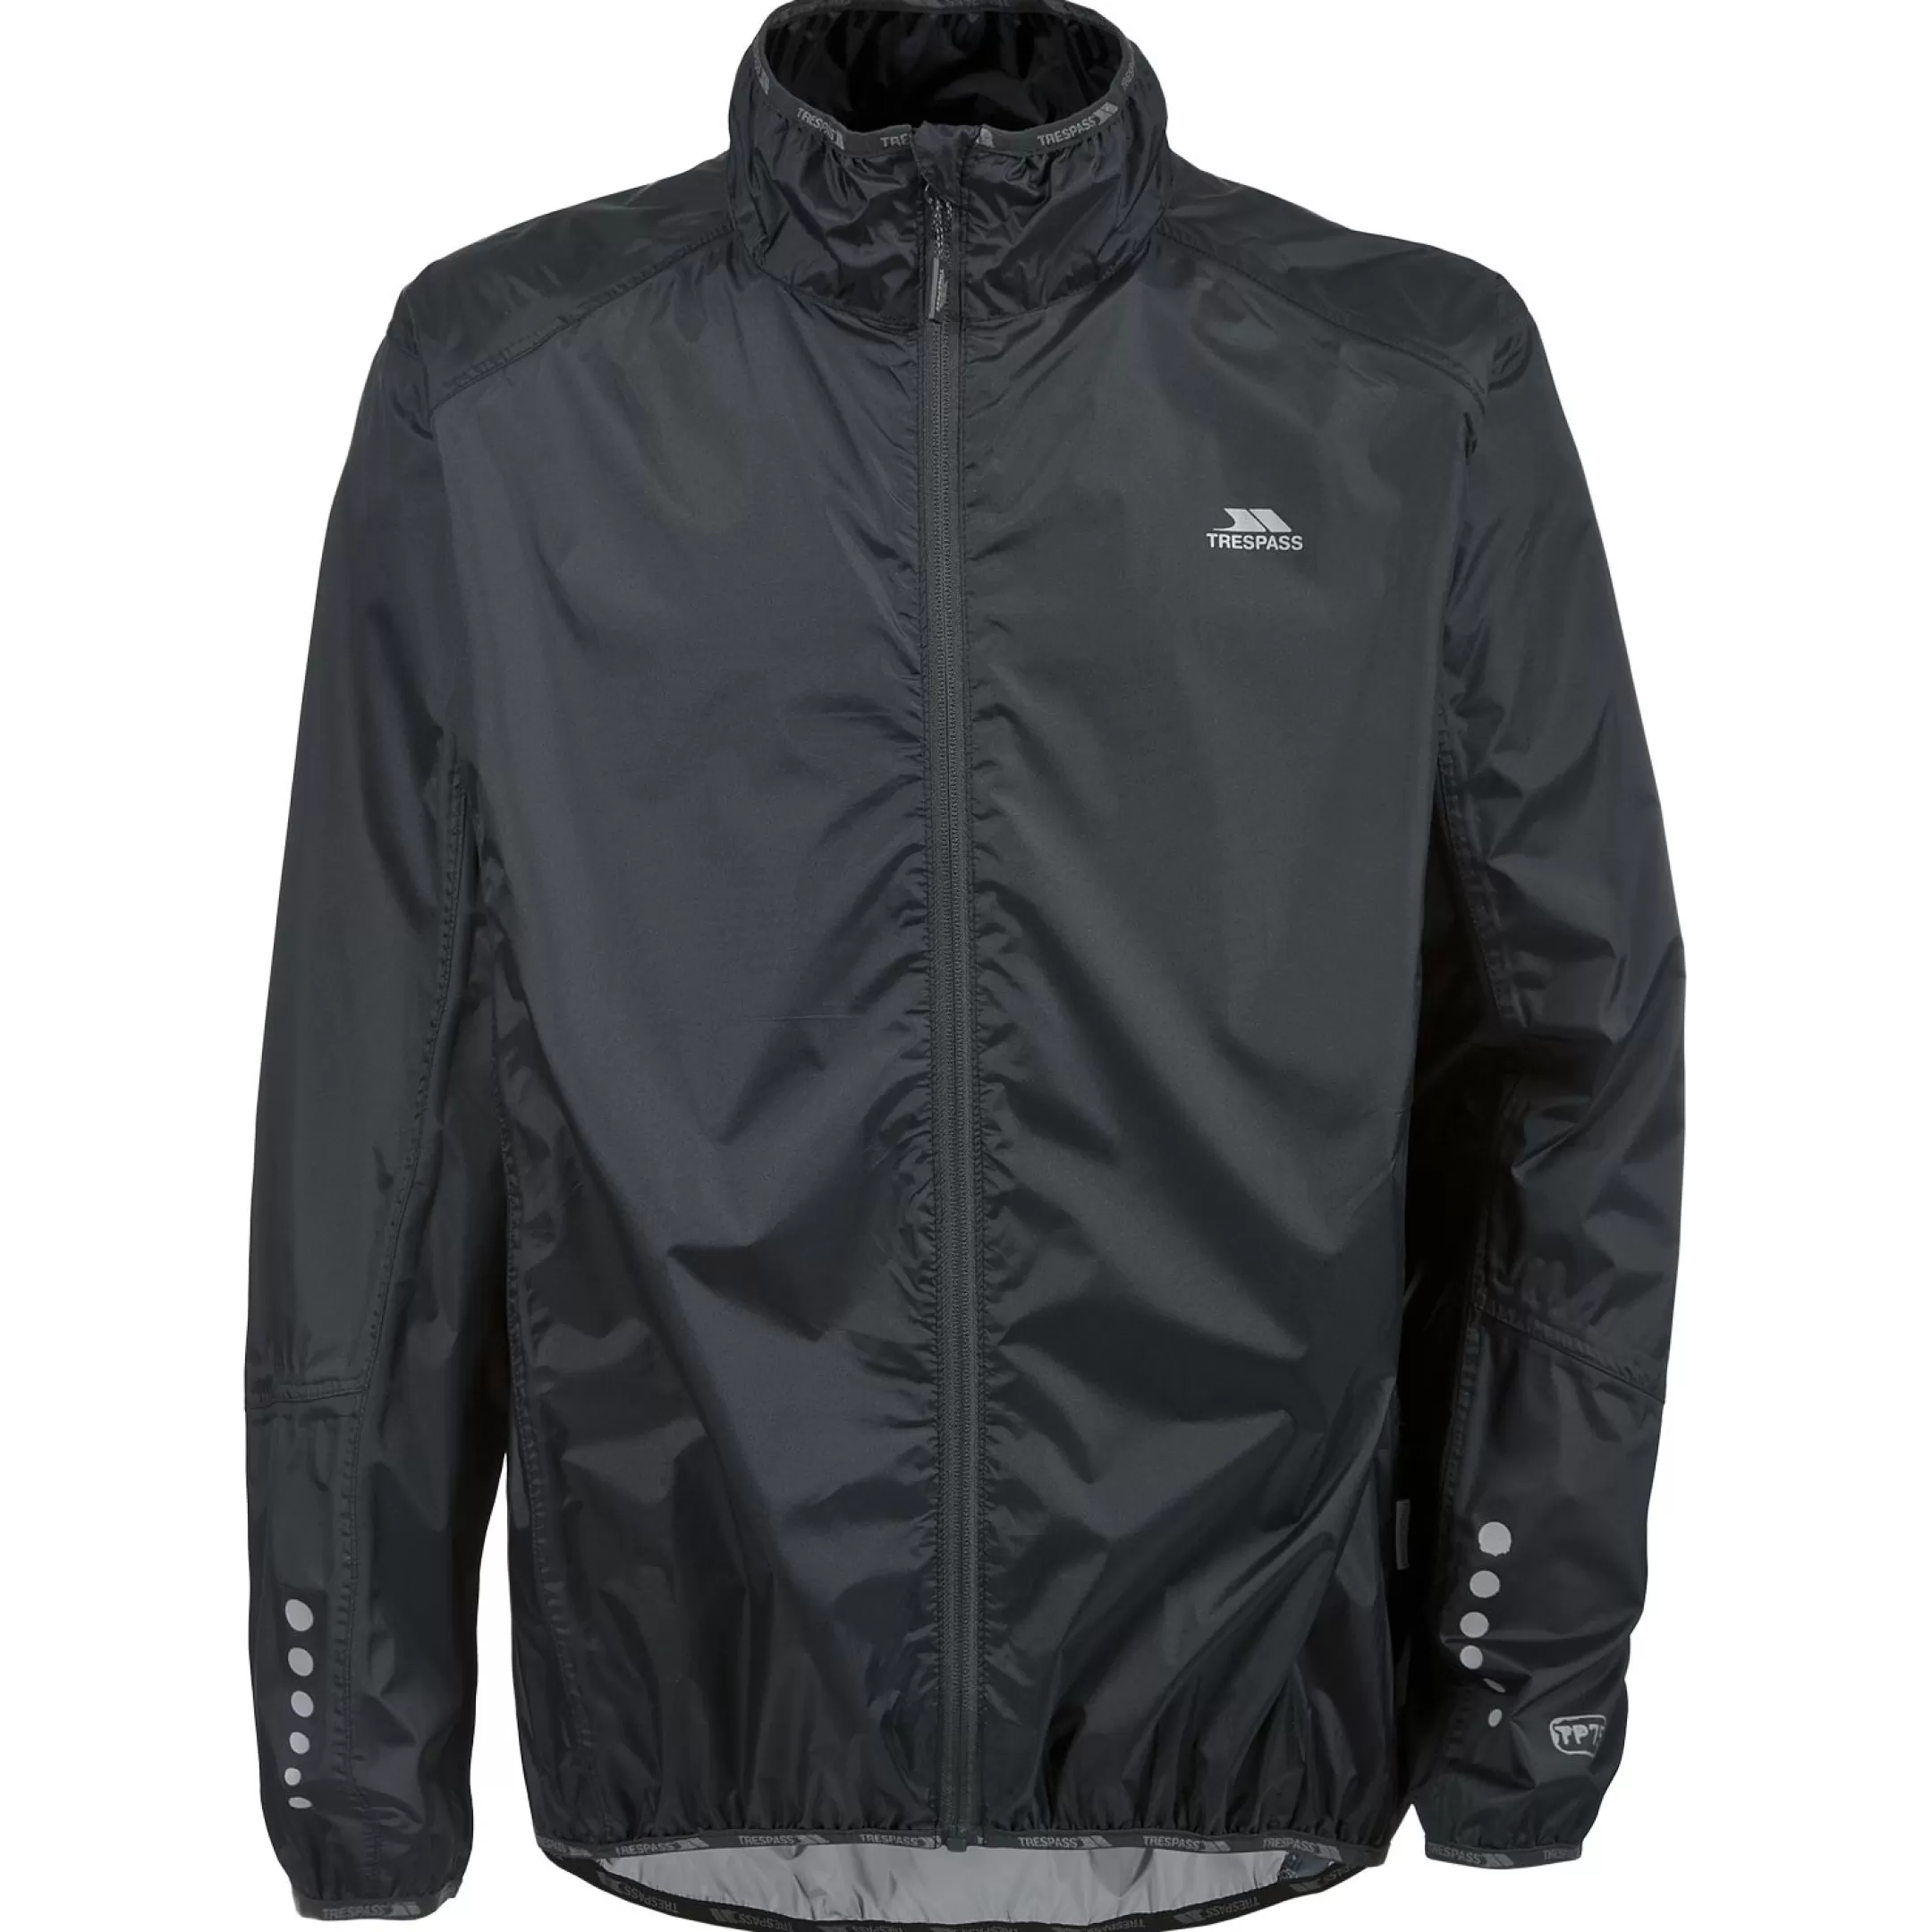 Men's Waterproof Cycling Jacket Grafted | Trespass Flash Sale